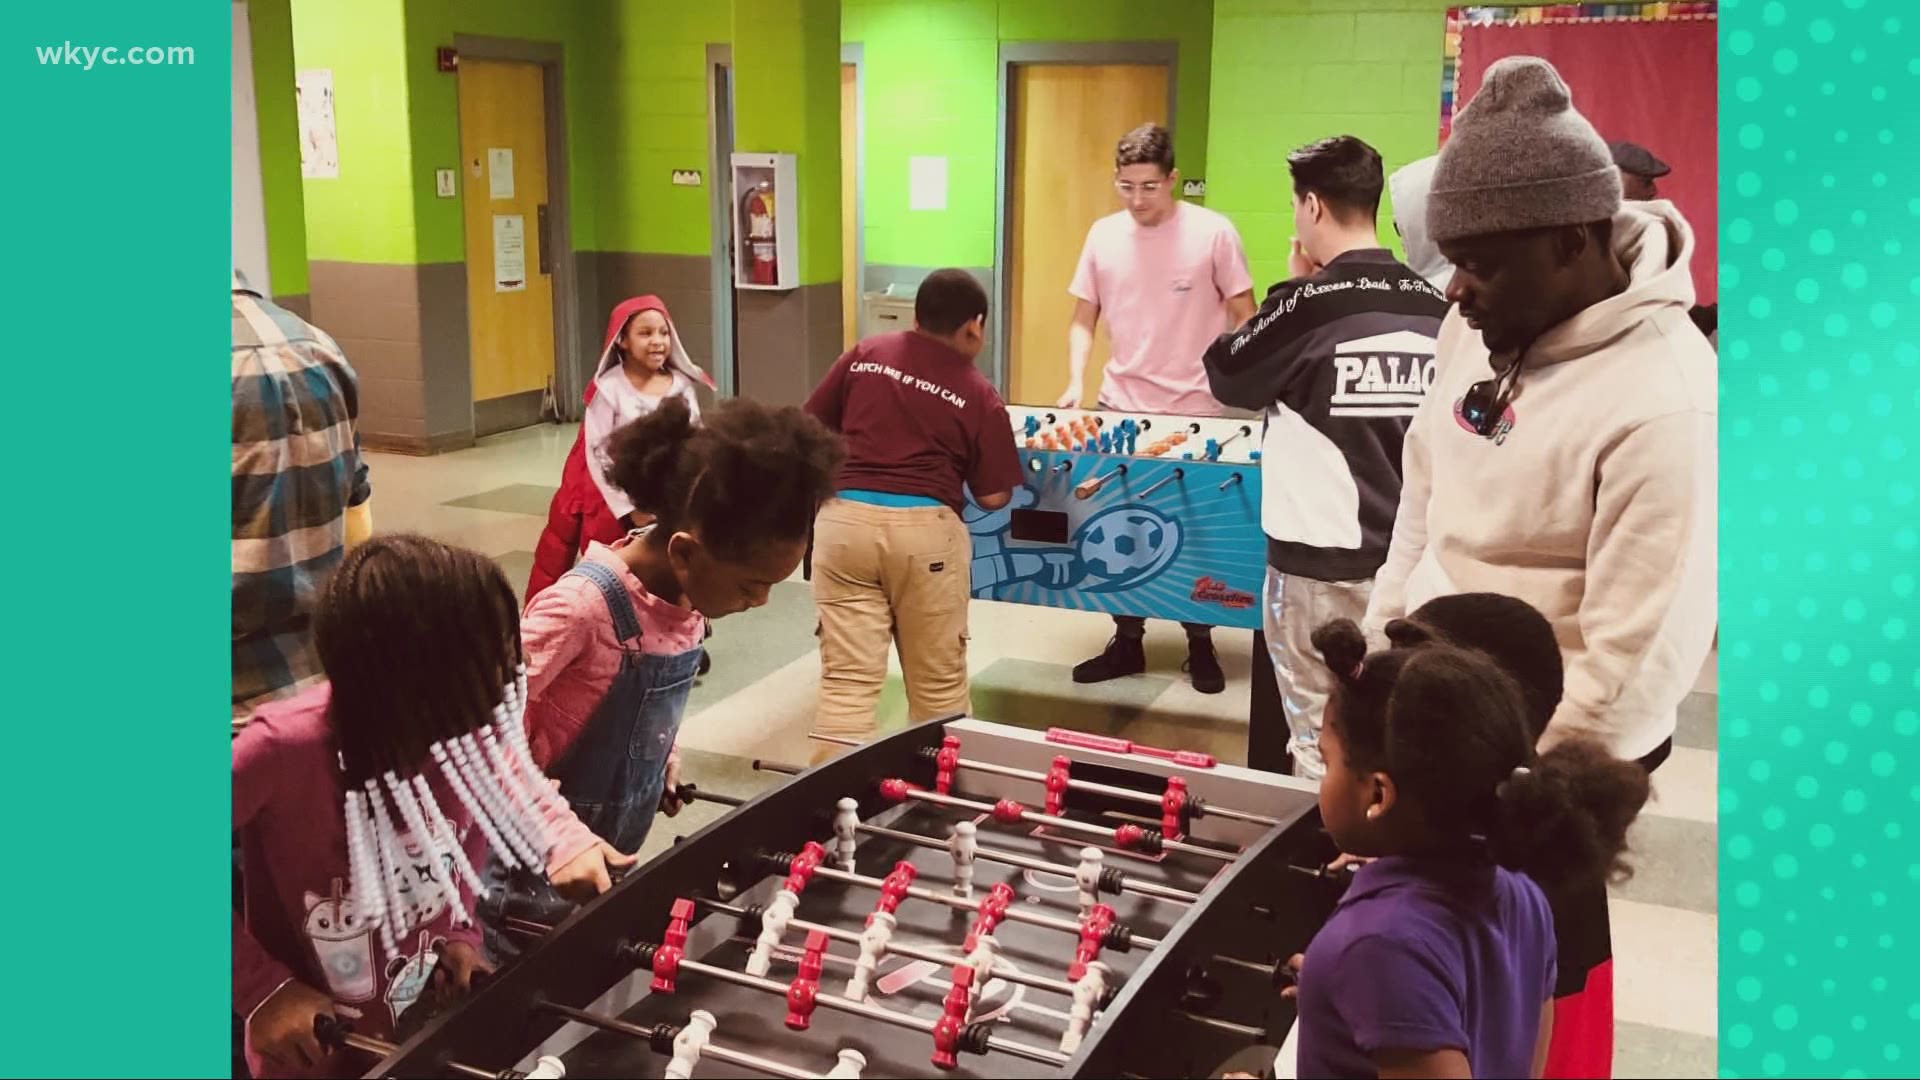 Most of the movie, now out in theaters, was filmed in the city. The cast stopped by the local Boys & Girls Club during production to speak with the kids.